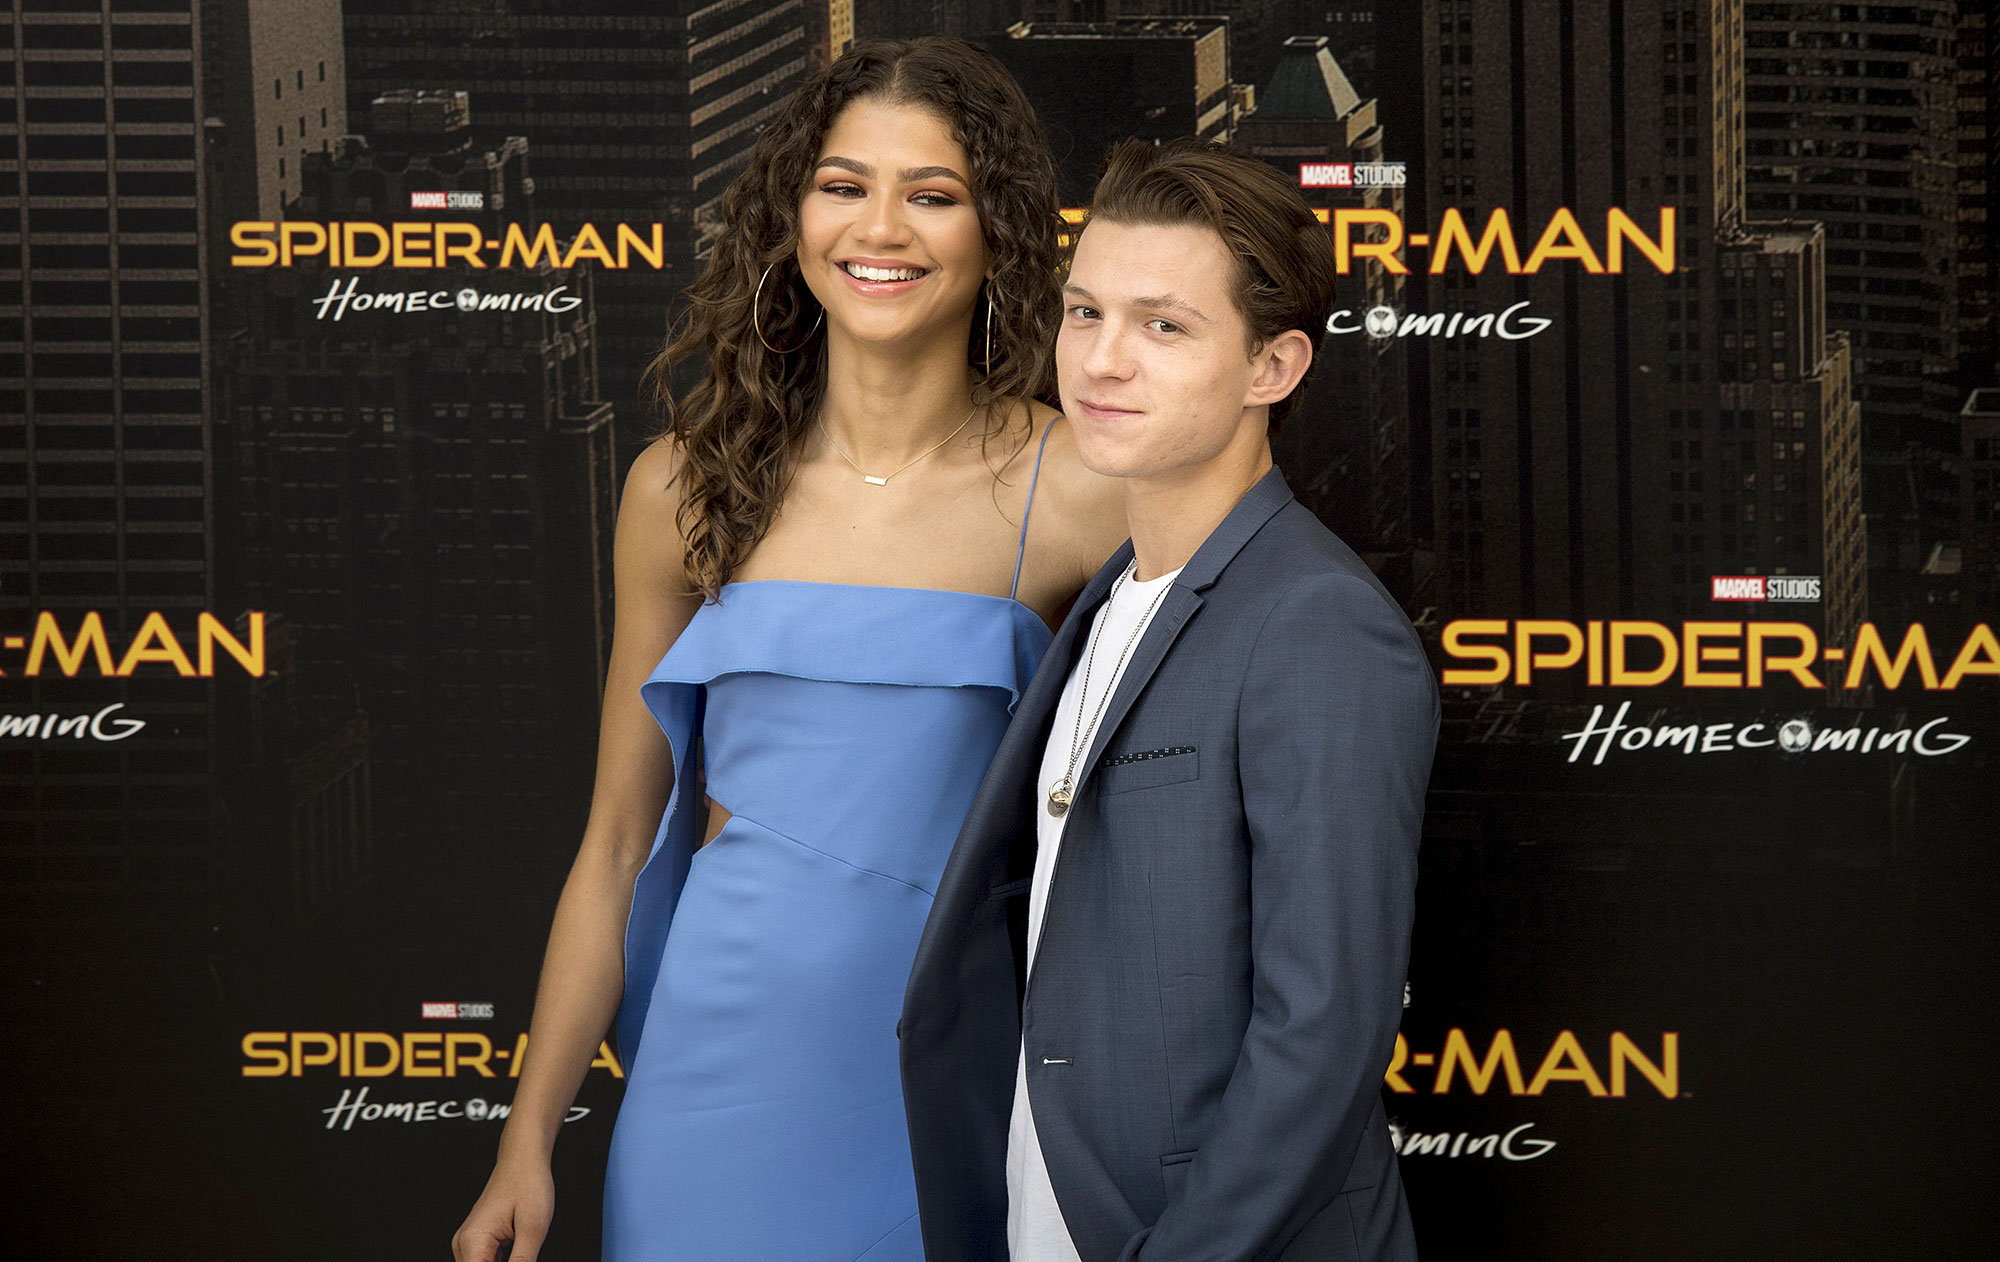 Twitter's favourite celebrity couple Zendaya and Tom Holland hold